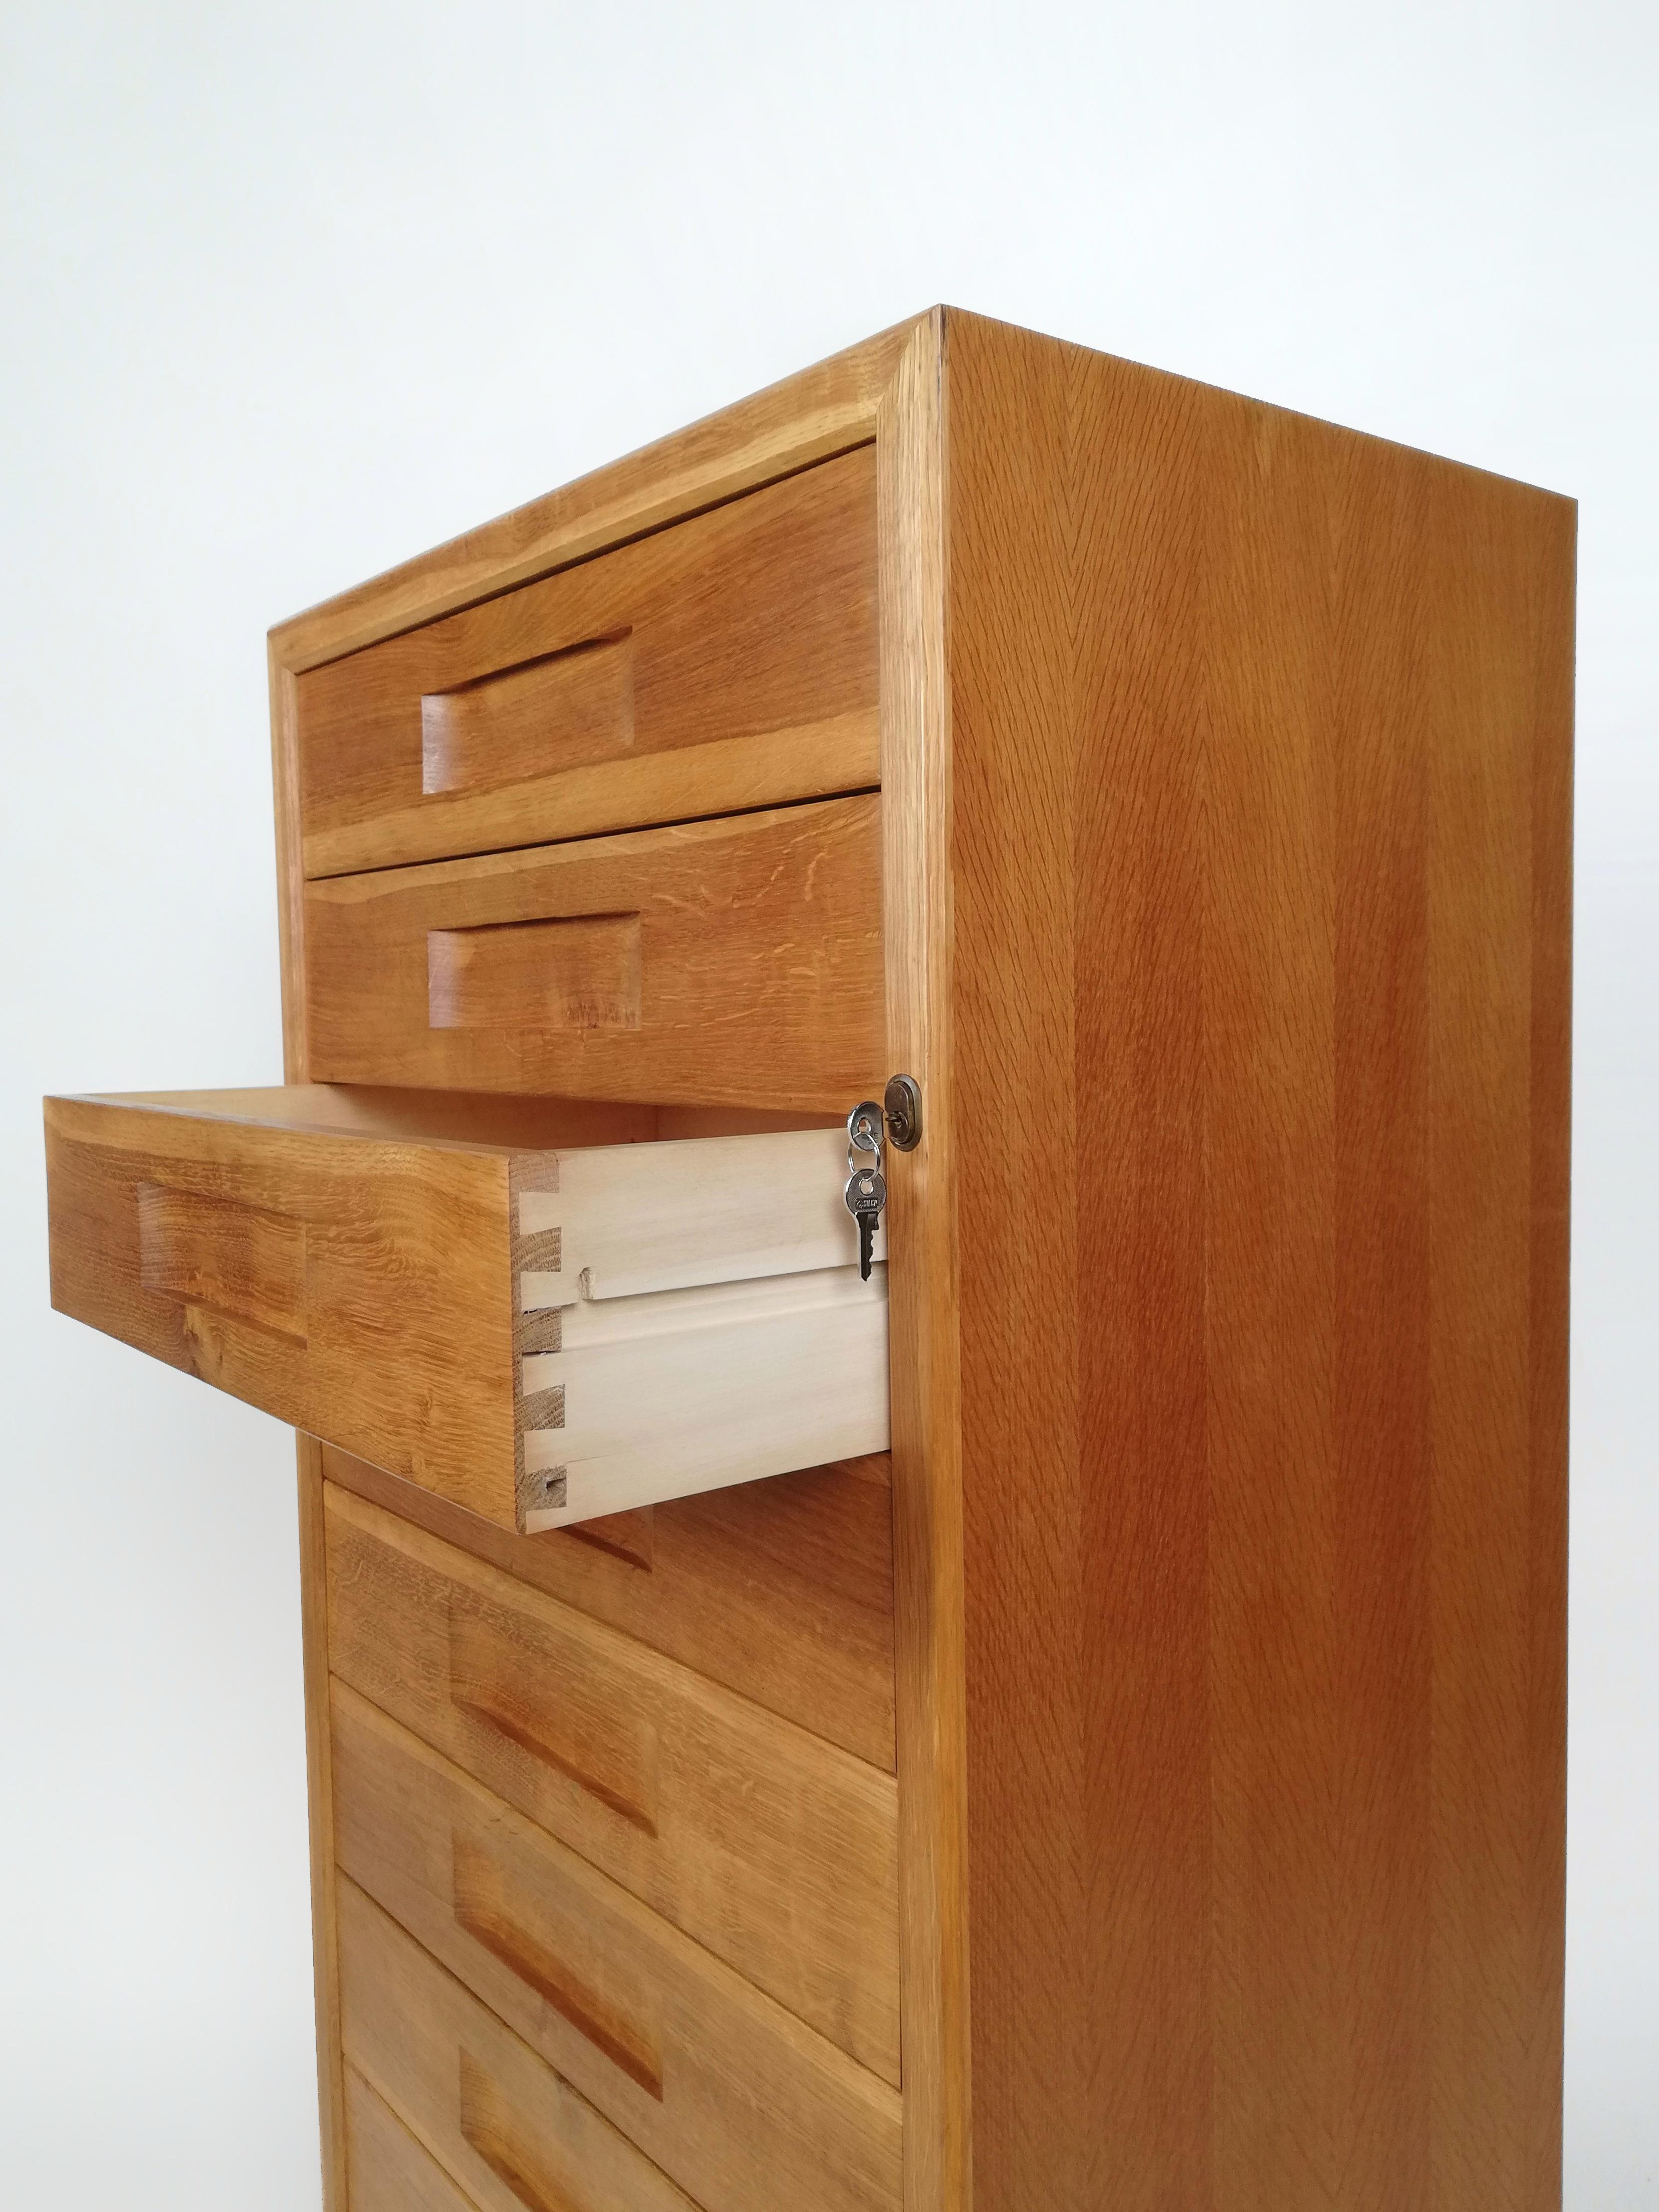 Italian Vintage Oak and Birch Wood Office Tallboy Chest of Drawers, 1960s For Sale 5